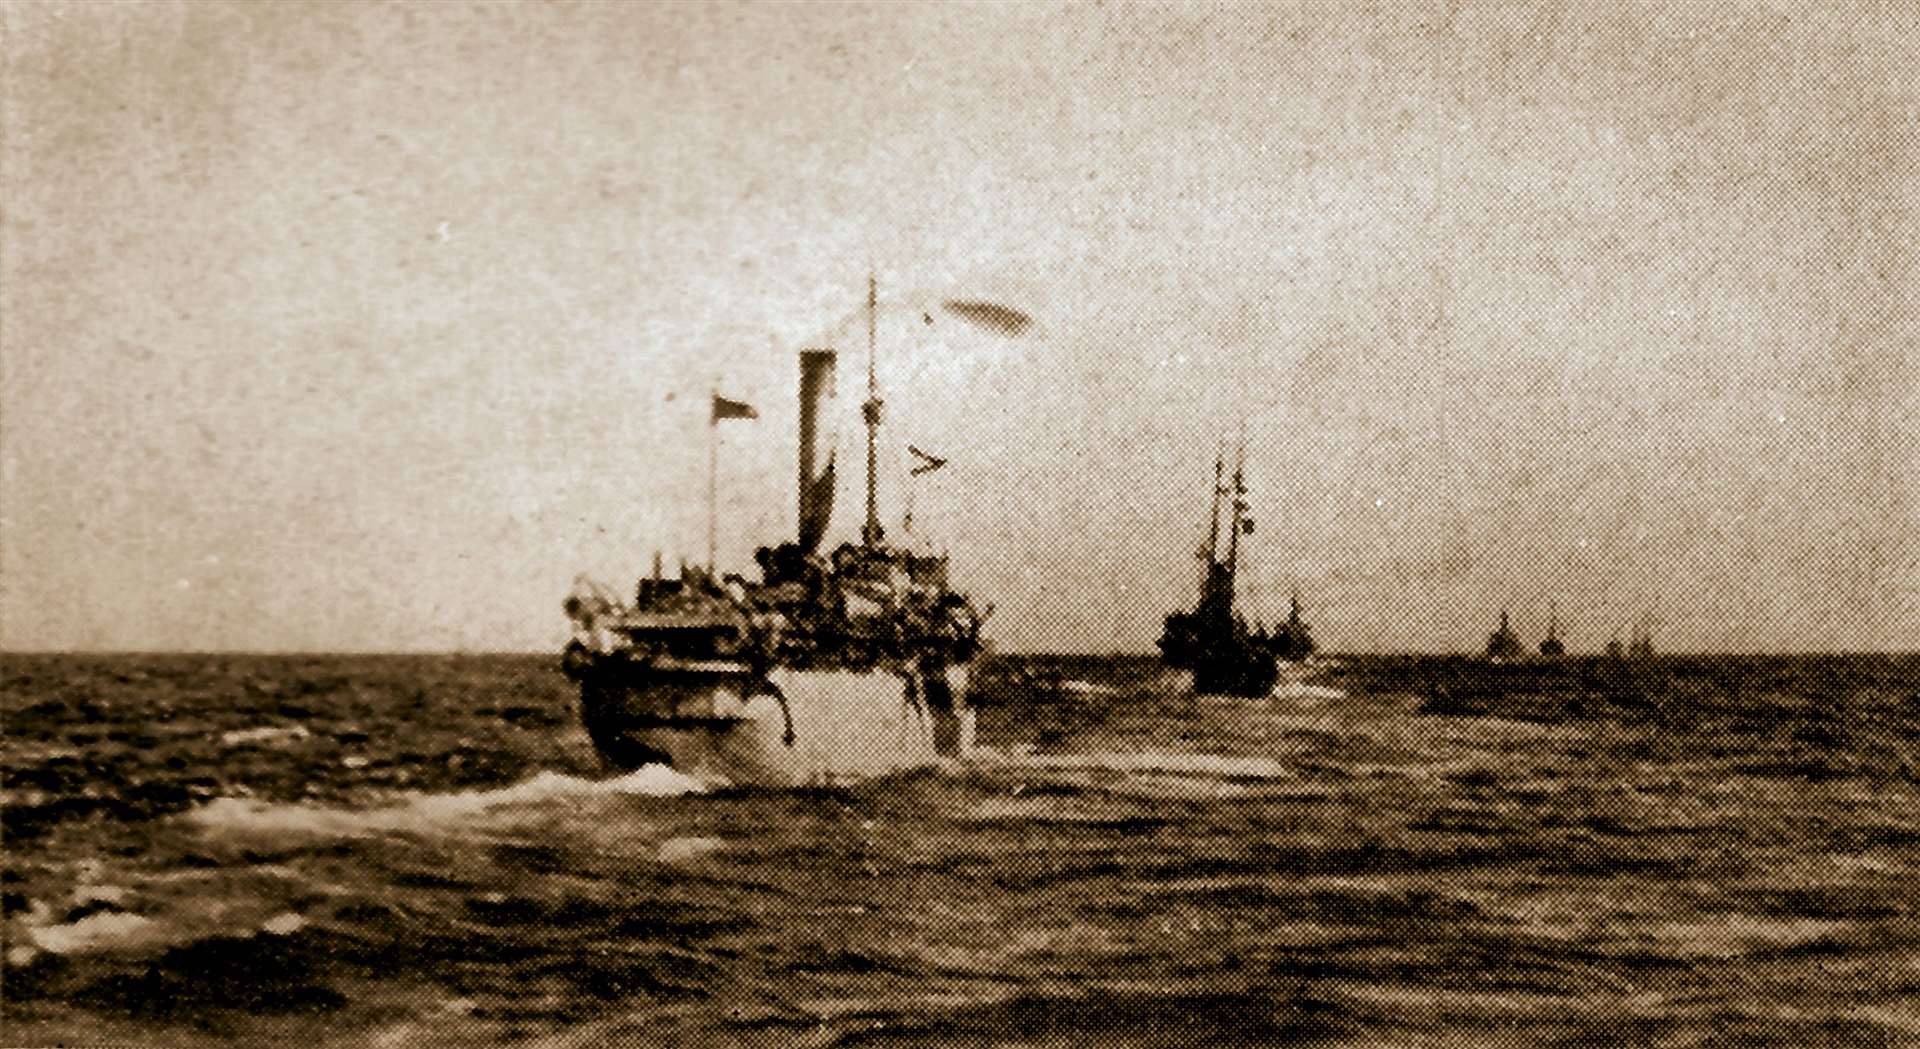 US minelayers in formation in the North Sea.